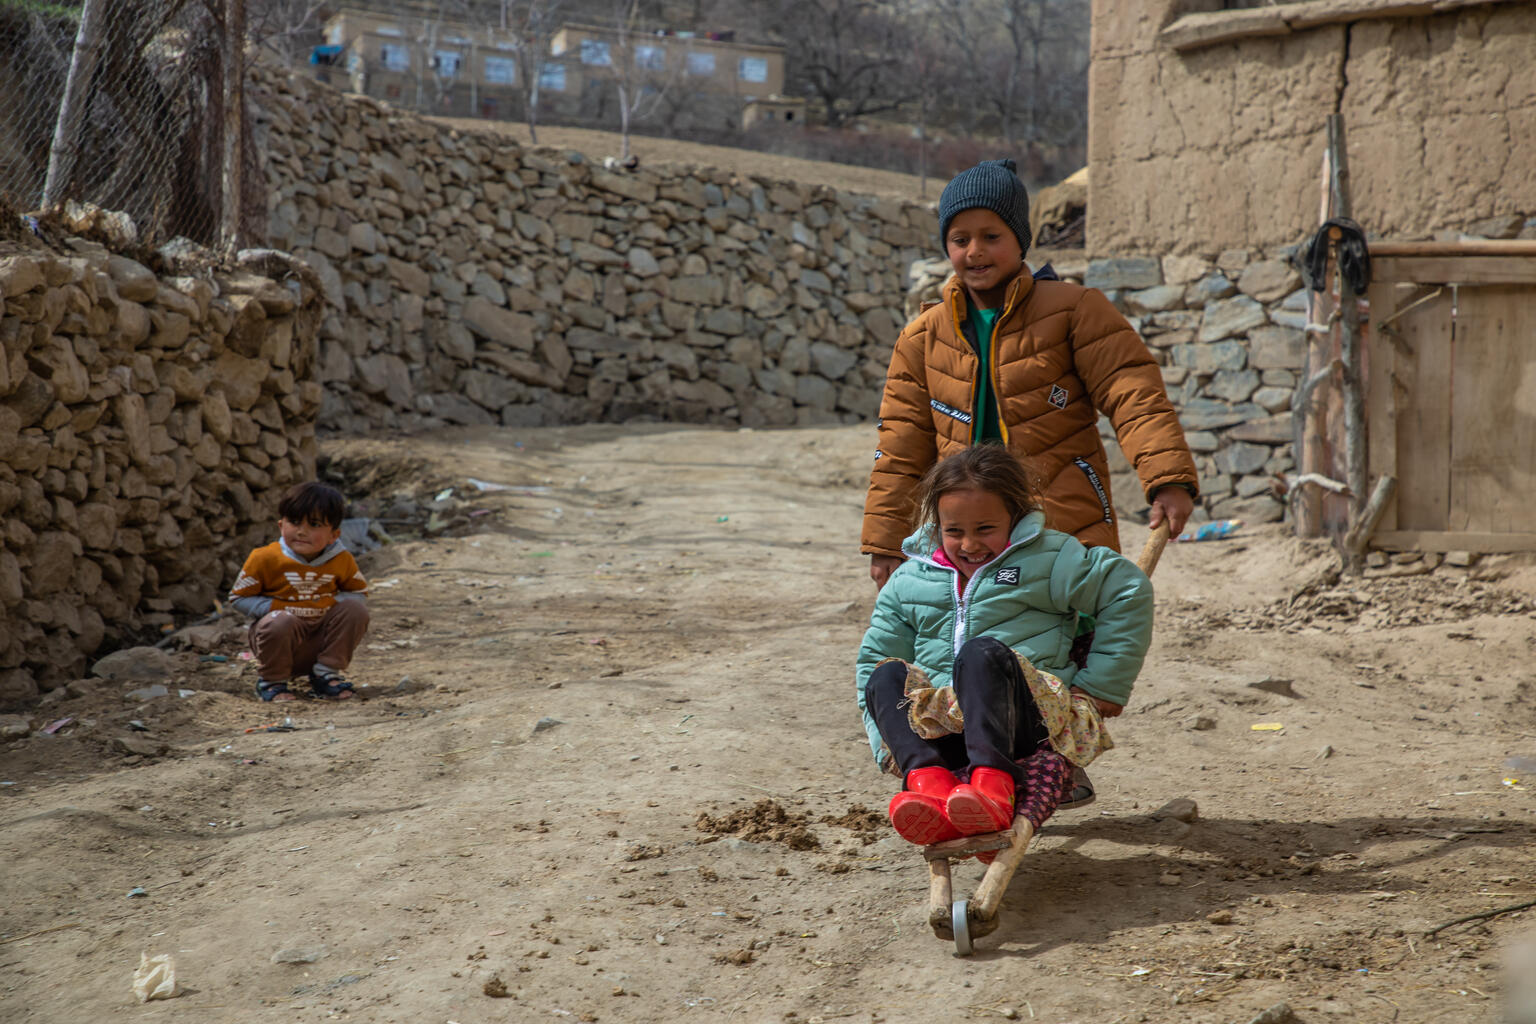 In Panjshir, Afghanistan, an older boy pushes a younger girl on a trolley, both are smiling.